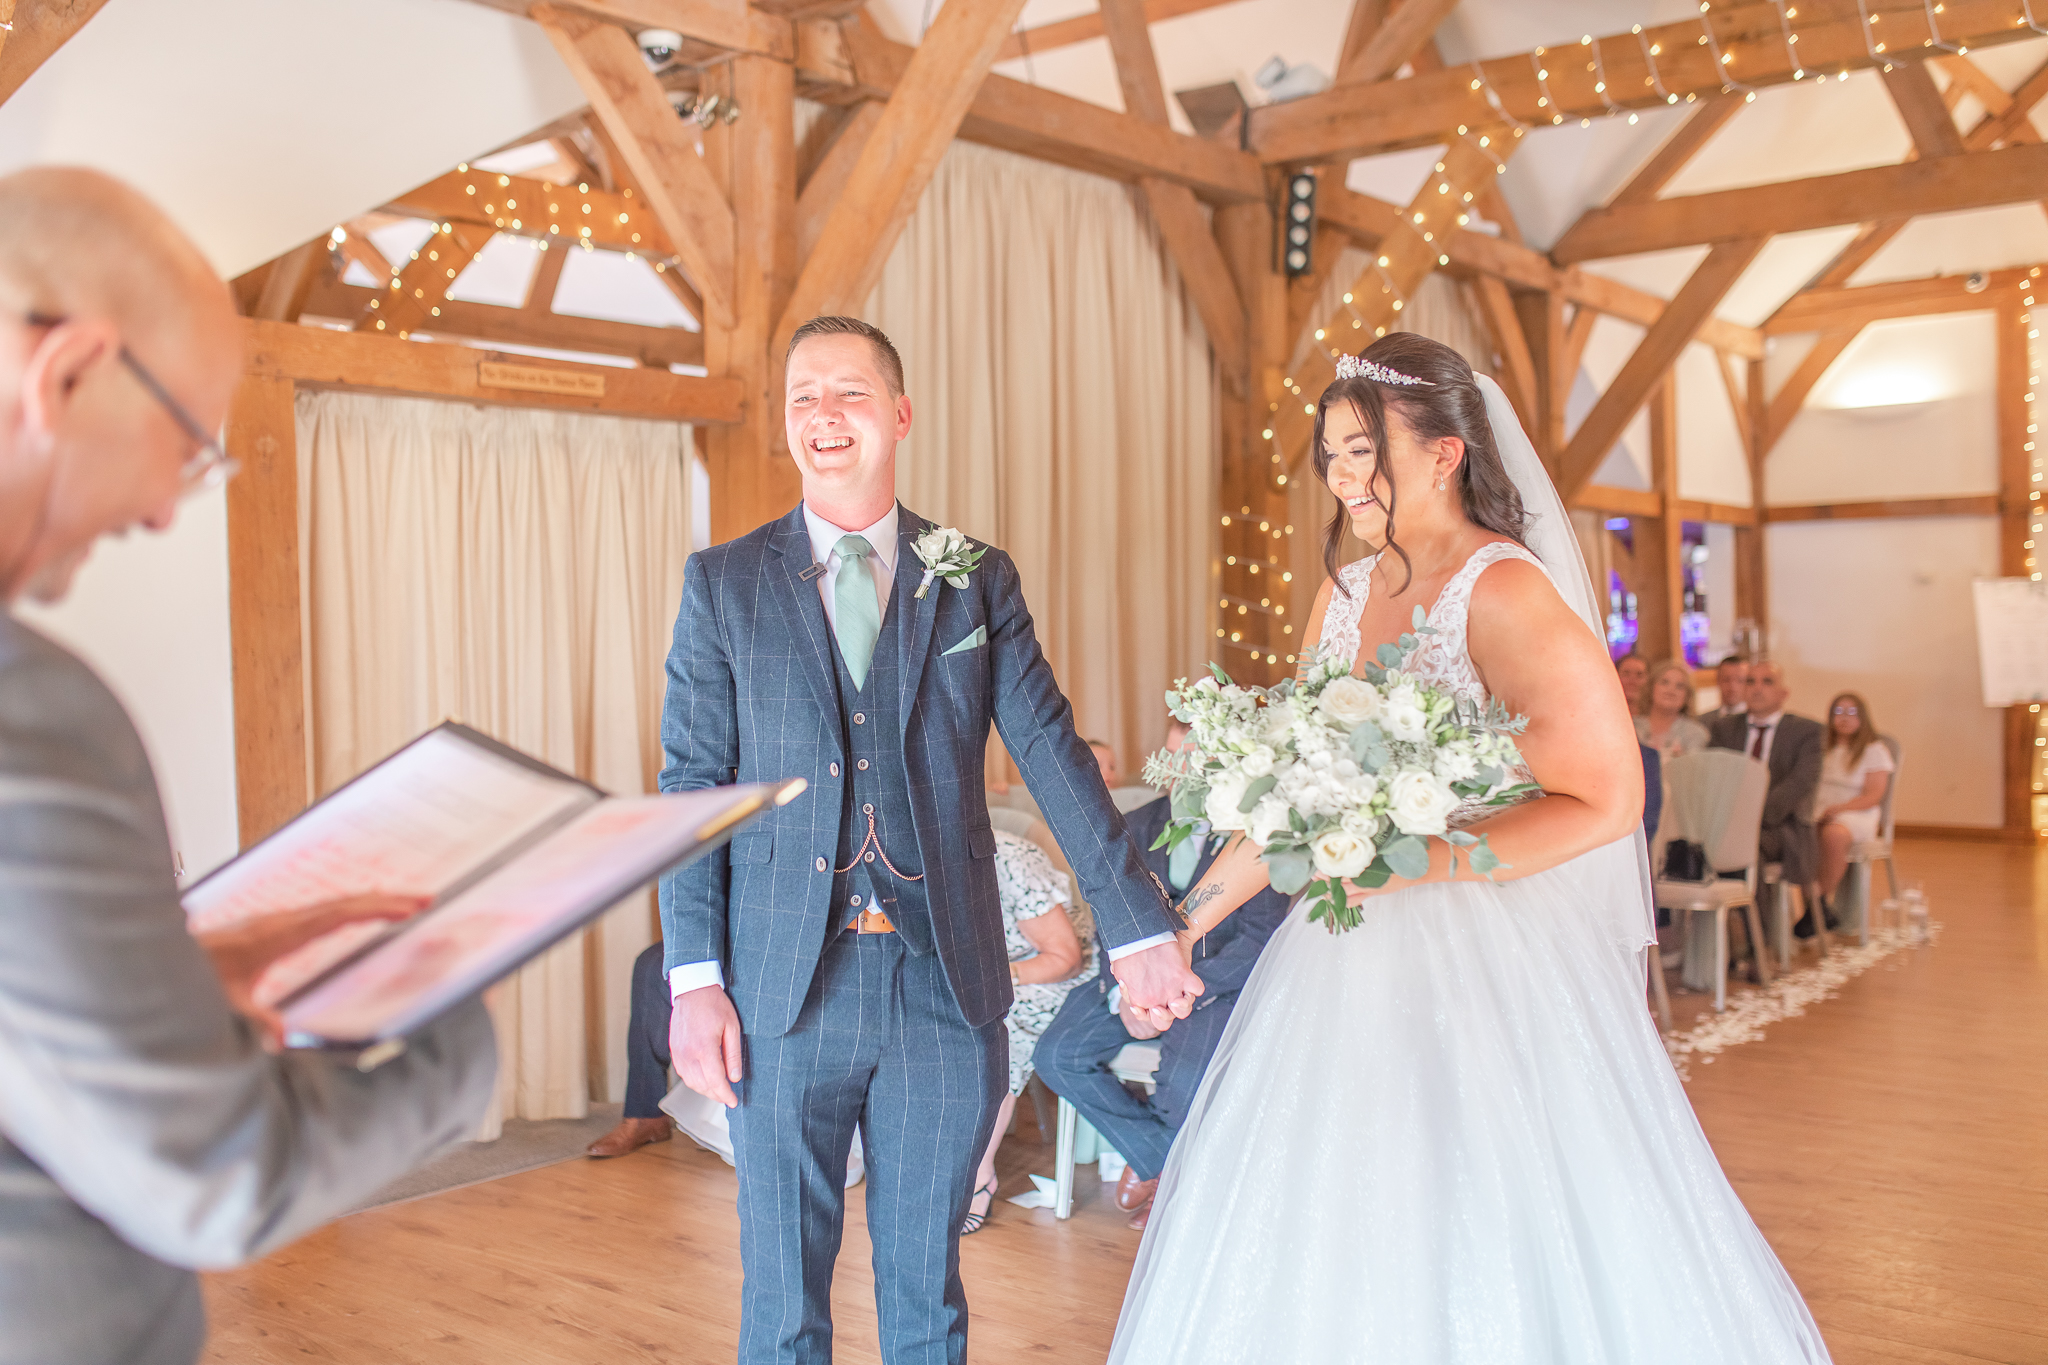 Aimee and Ant holding hands and laughing during their wedding ceremony at Sandhole Oak Wedding Barn in Cheshire